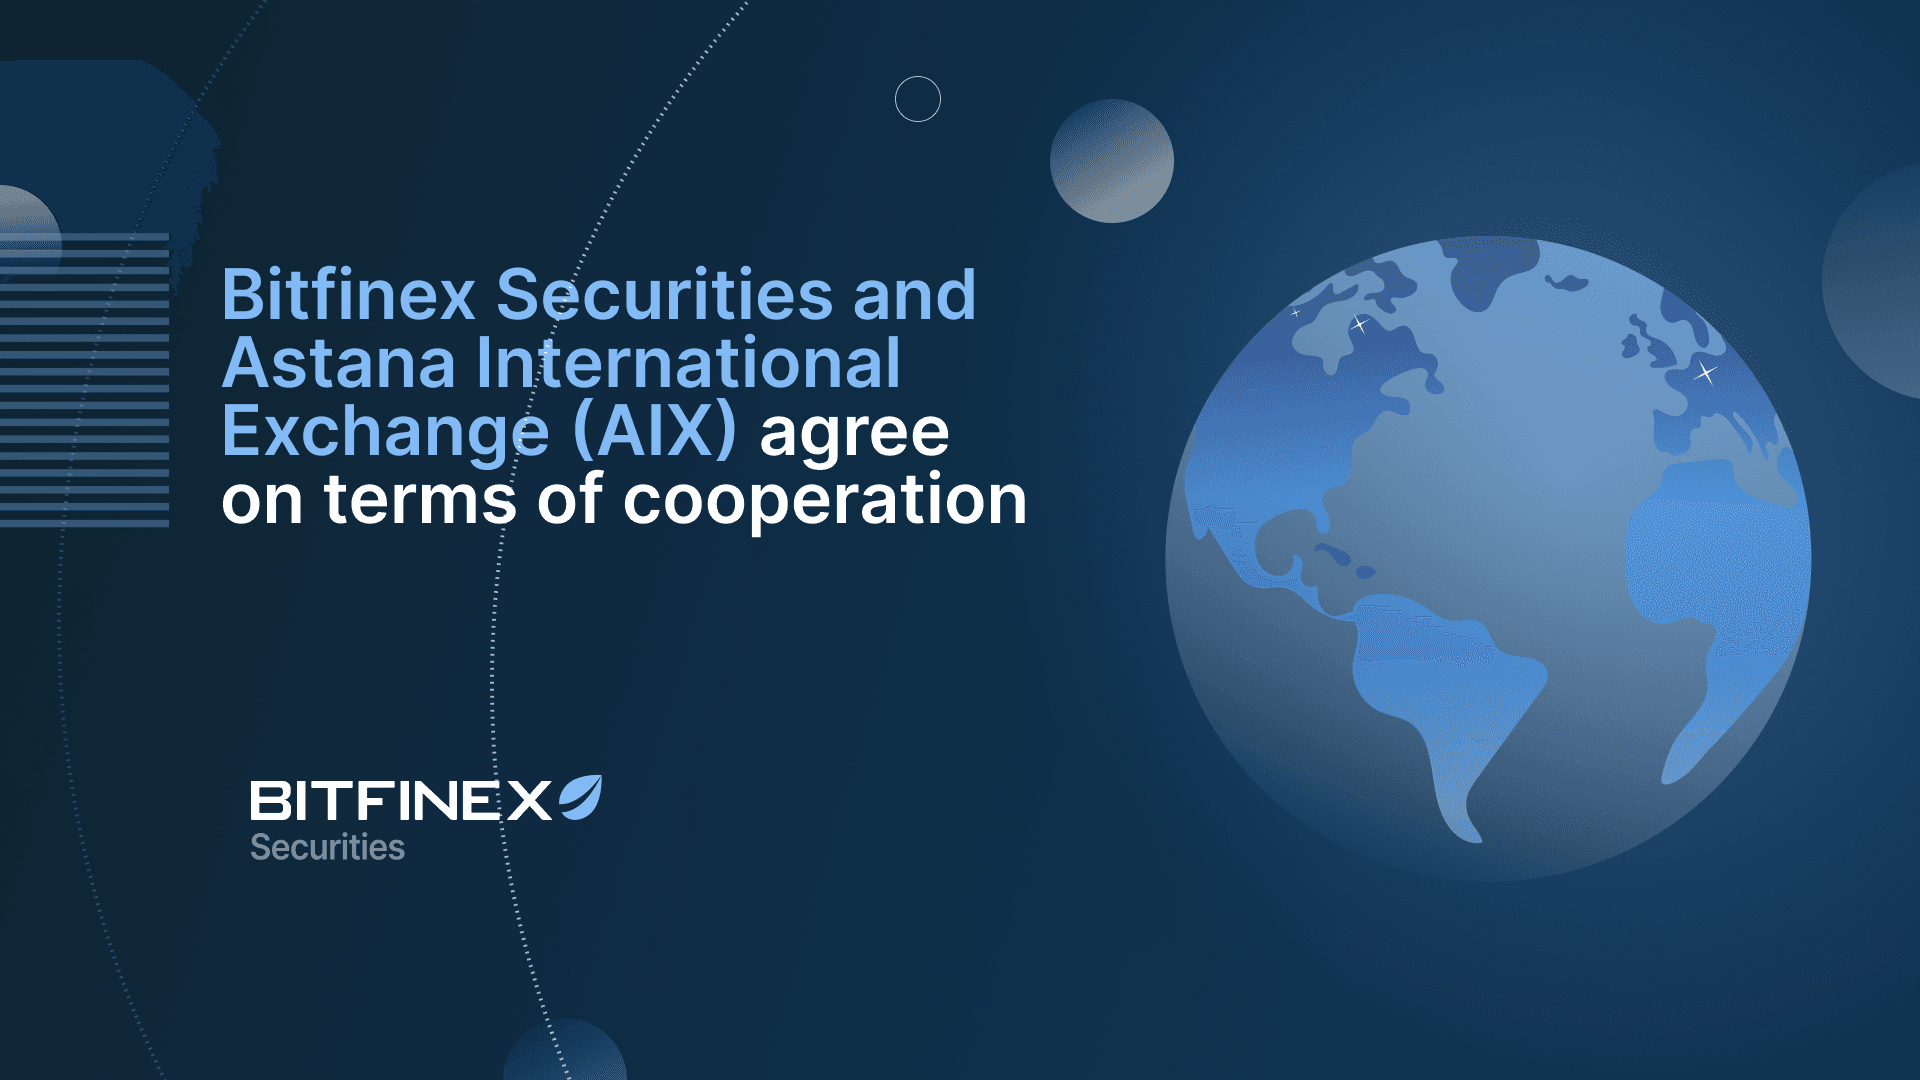 Bitfinex Securities and Astana International Exchange (AIX) agree on terms of cooperation